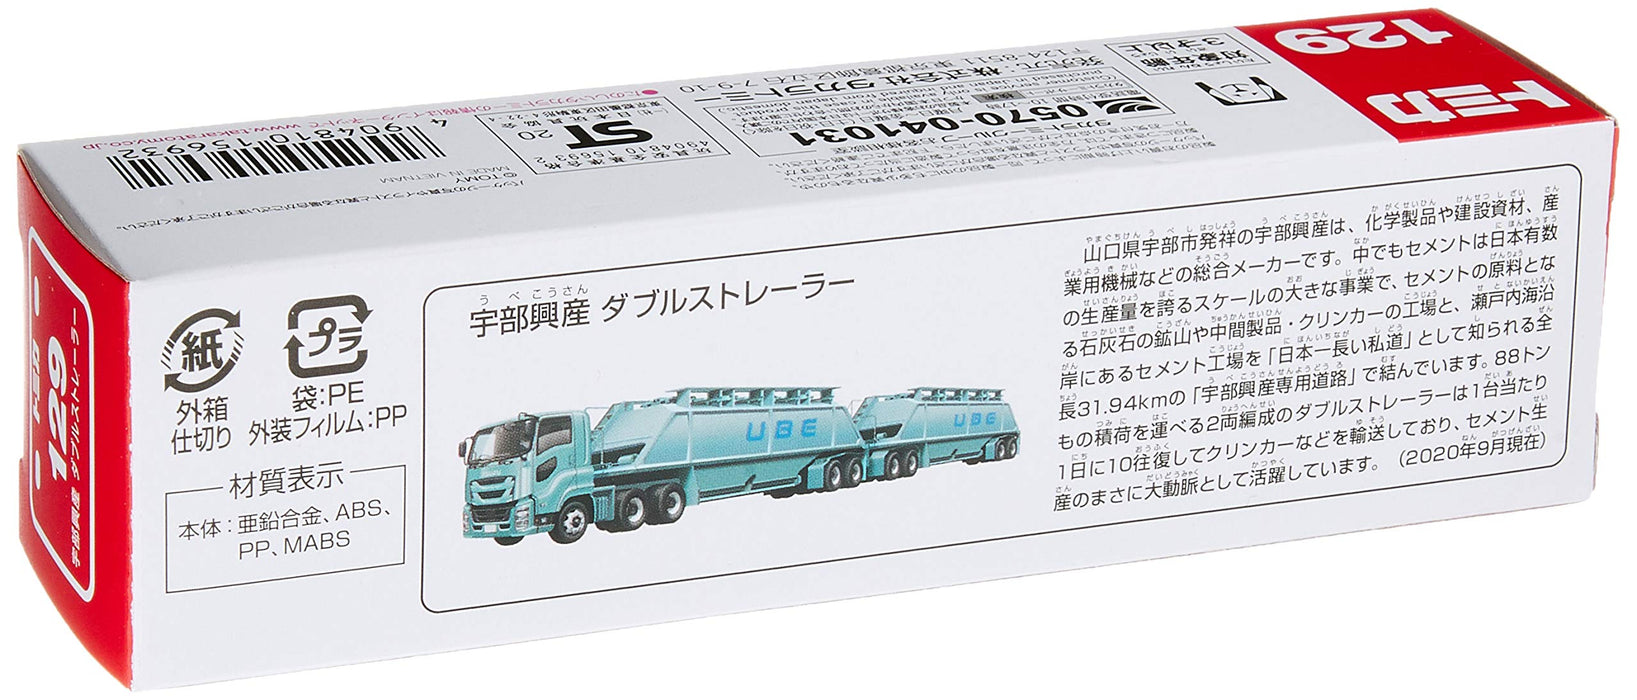 Tomica Long Type Tomica No.129 Remorque double Ube Industries